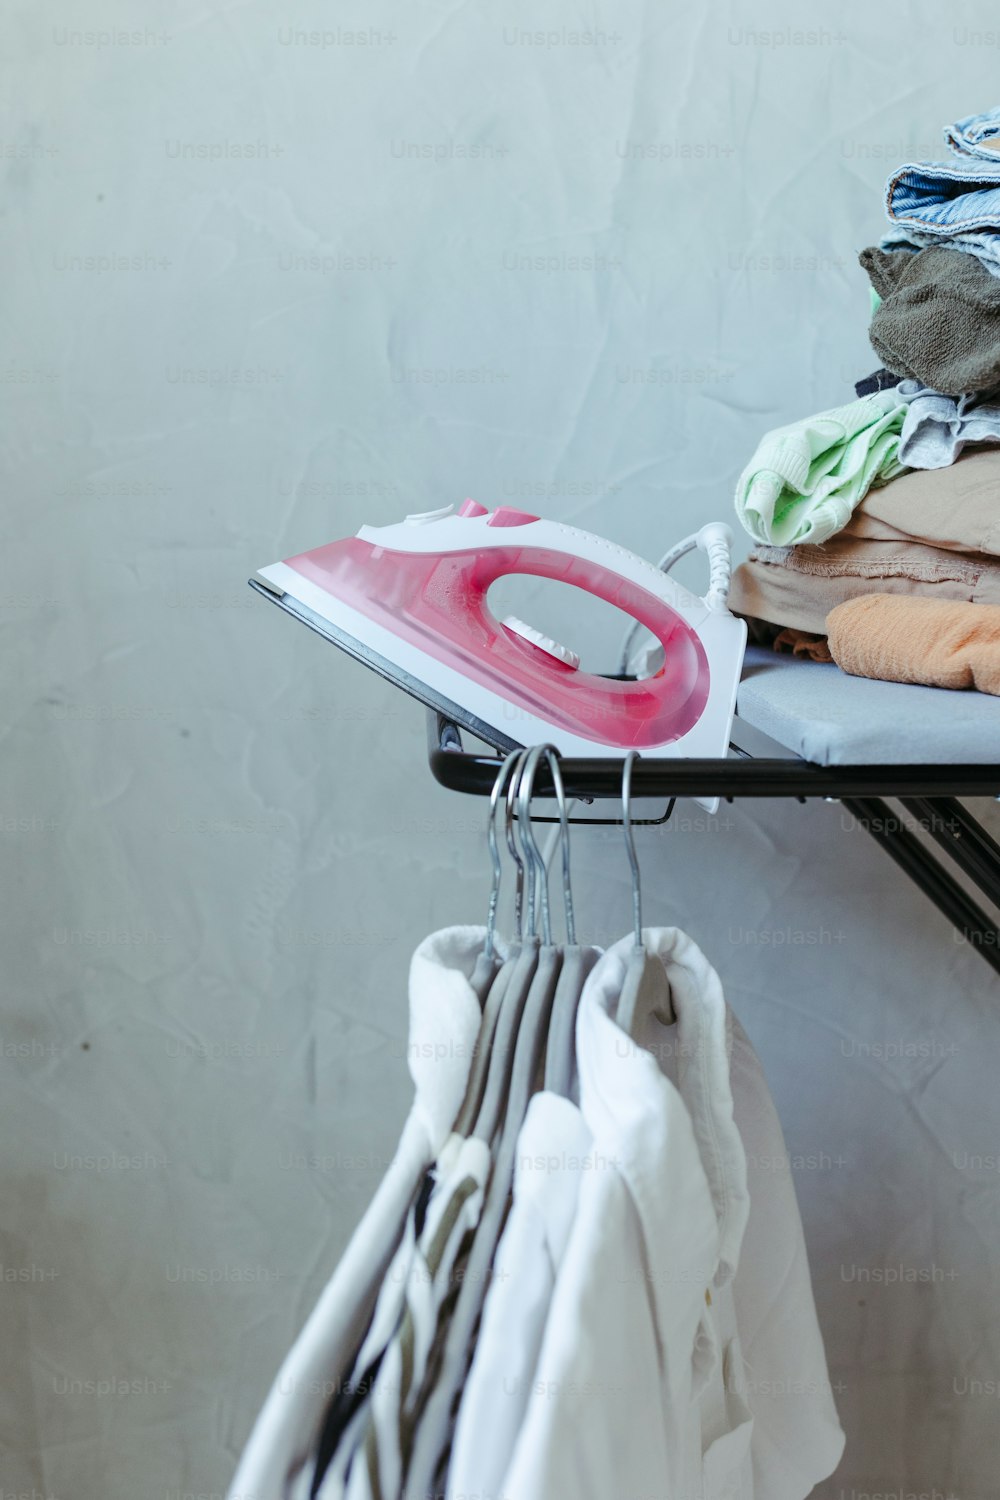 ironing board with iron and clothes on it